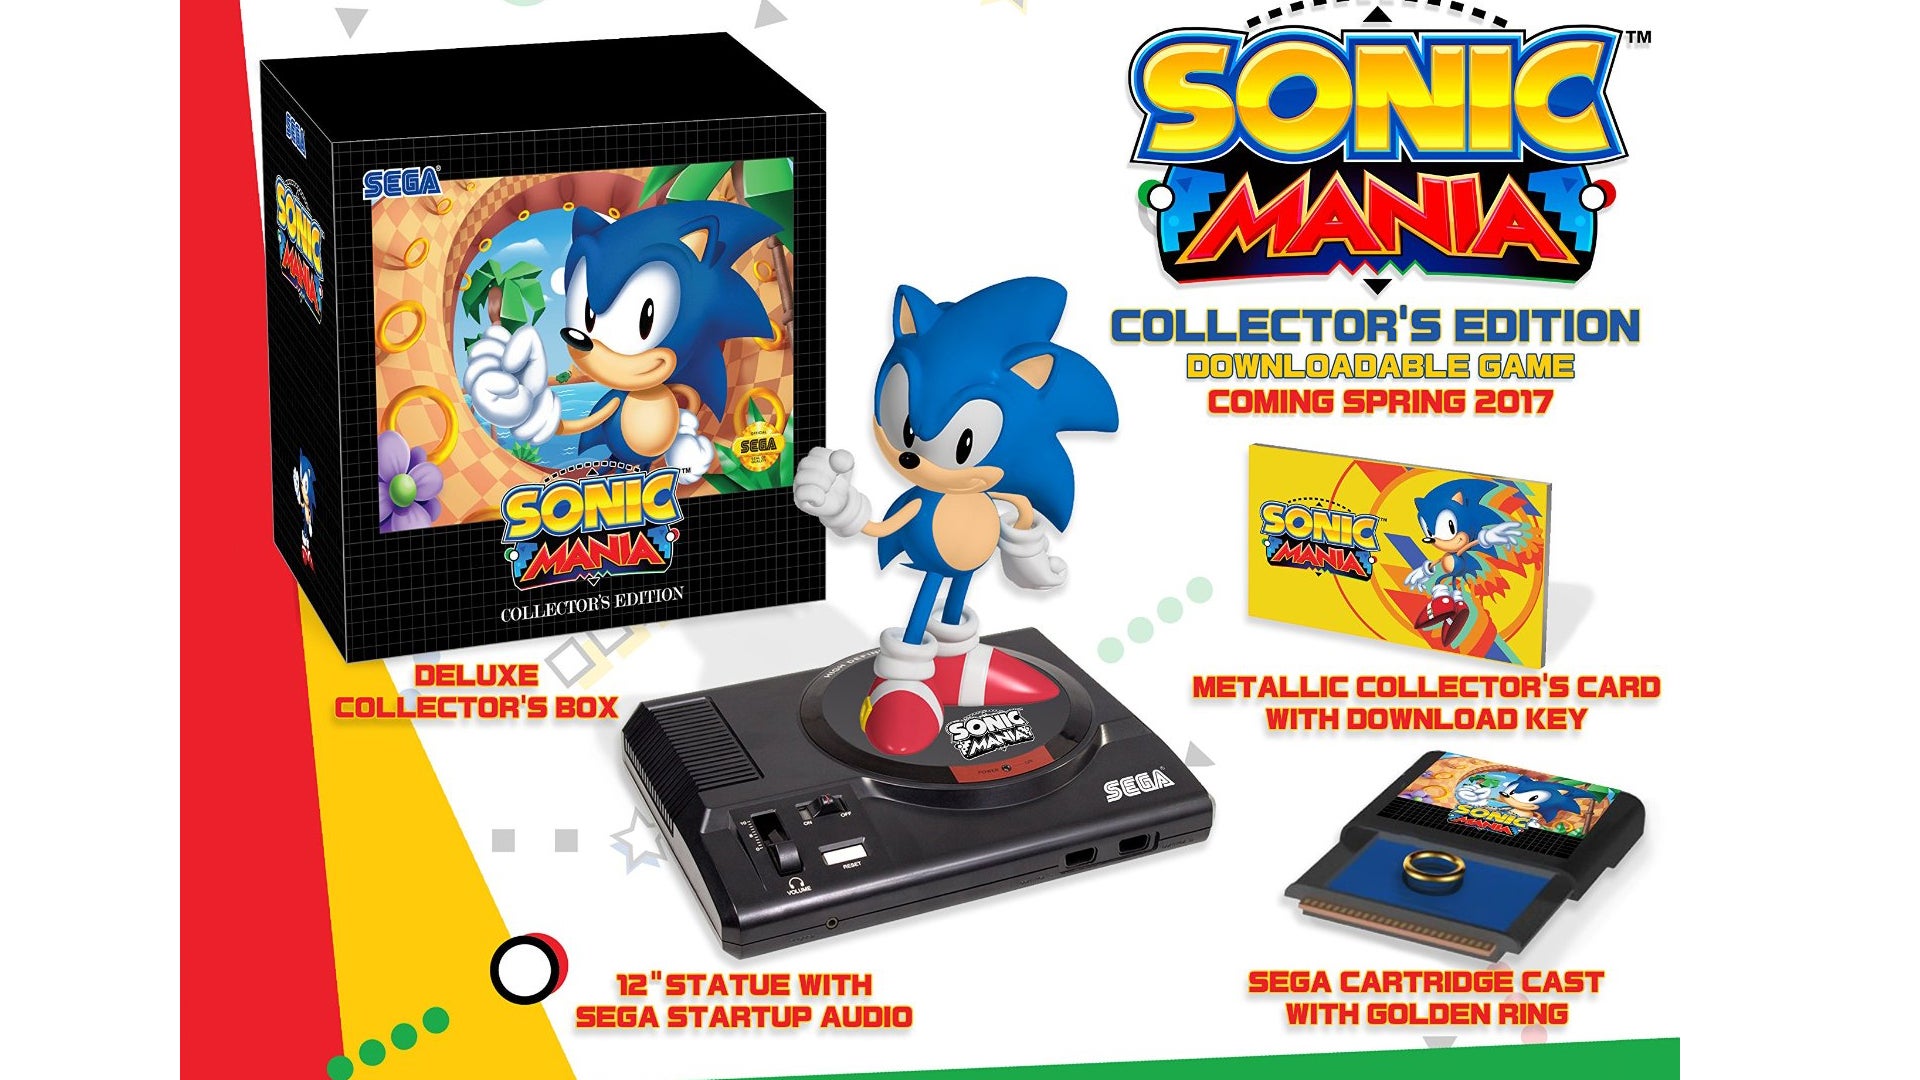 Image for This week’s best game deals: Sonic Mania Collector's Edition, cheap PC downloads, Fallout 4, and more